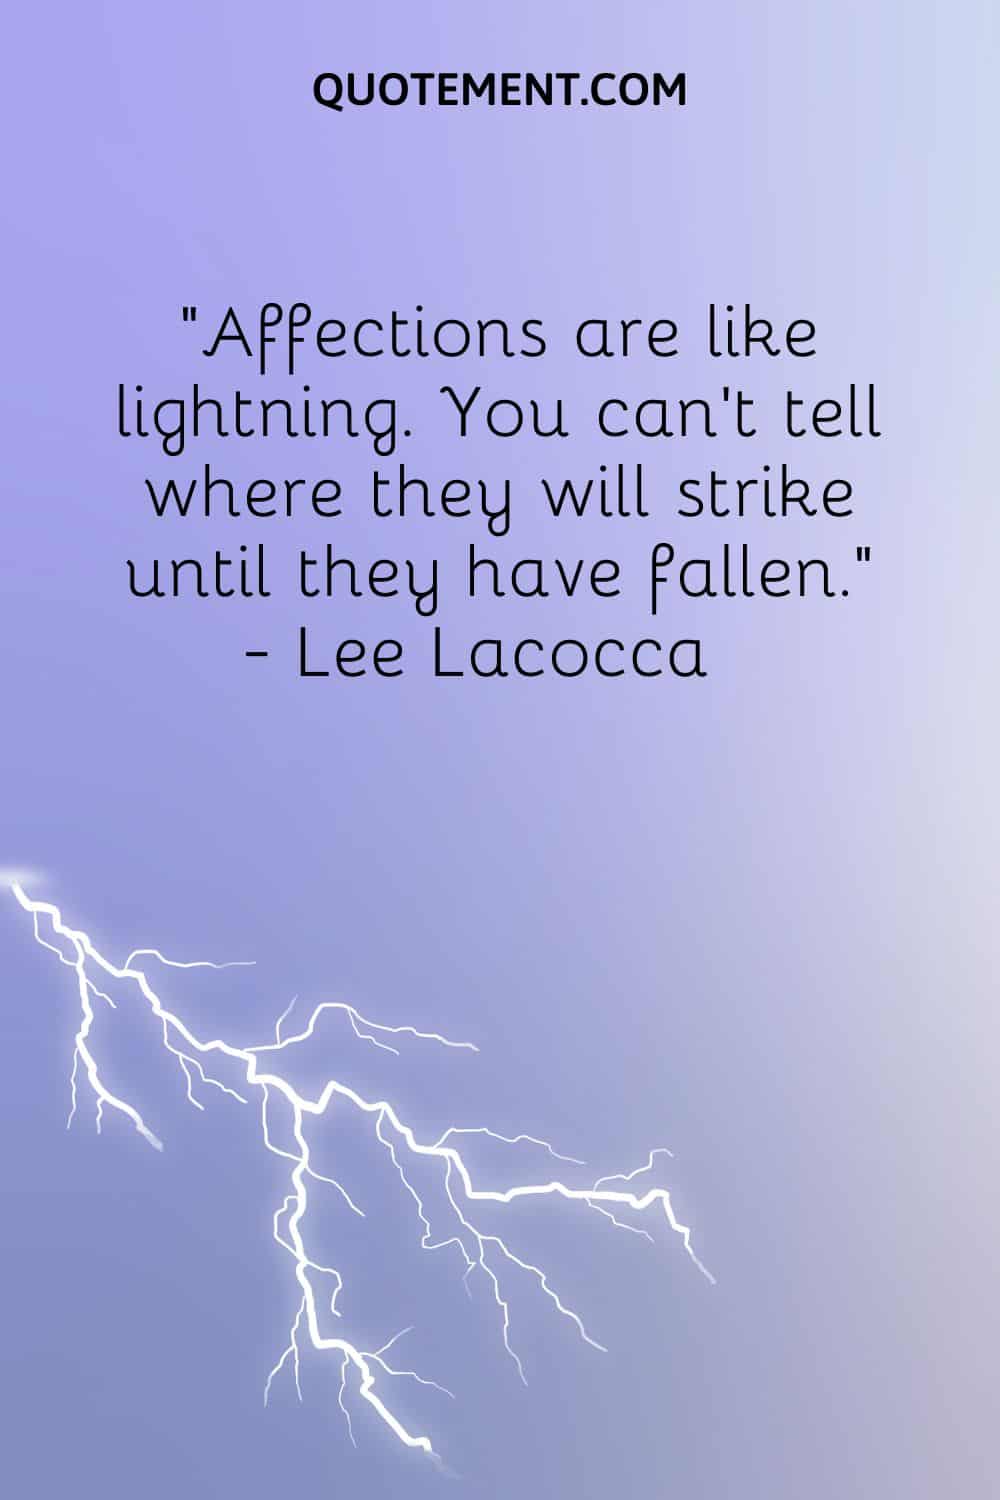 Ultimate List Of 100 Lightning Quotes To Inspire You